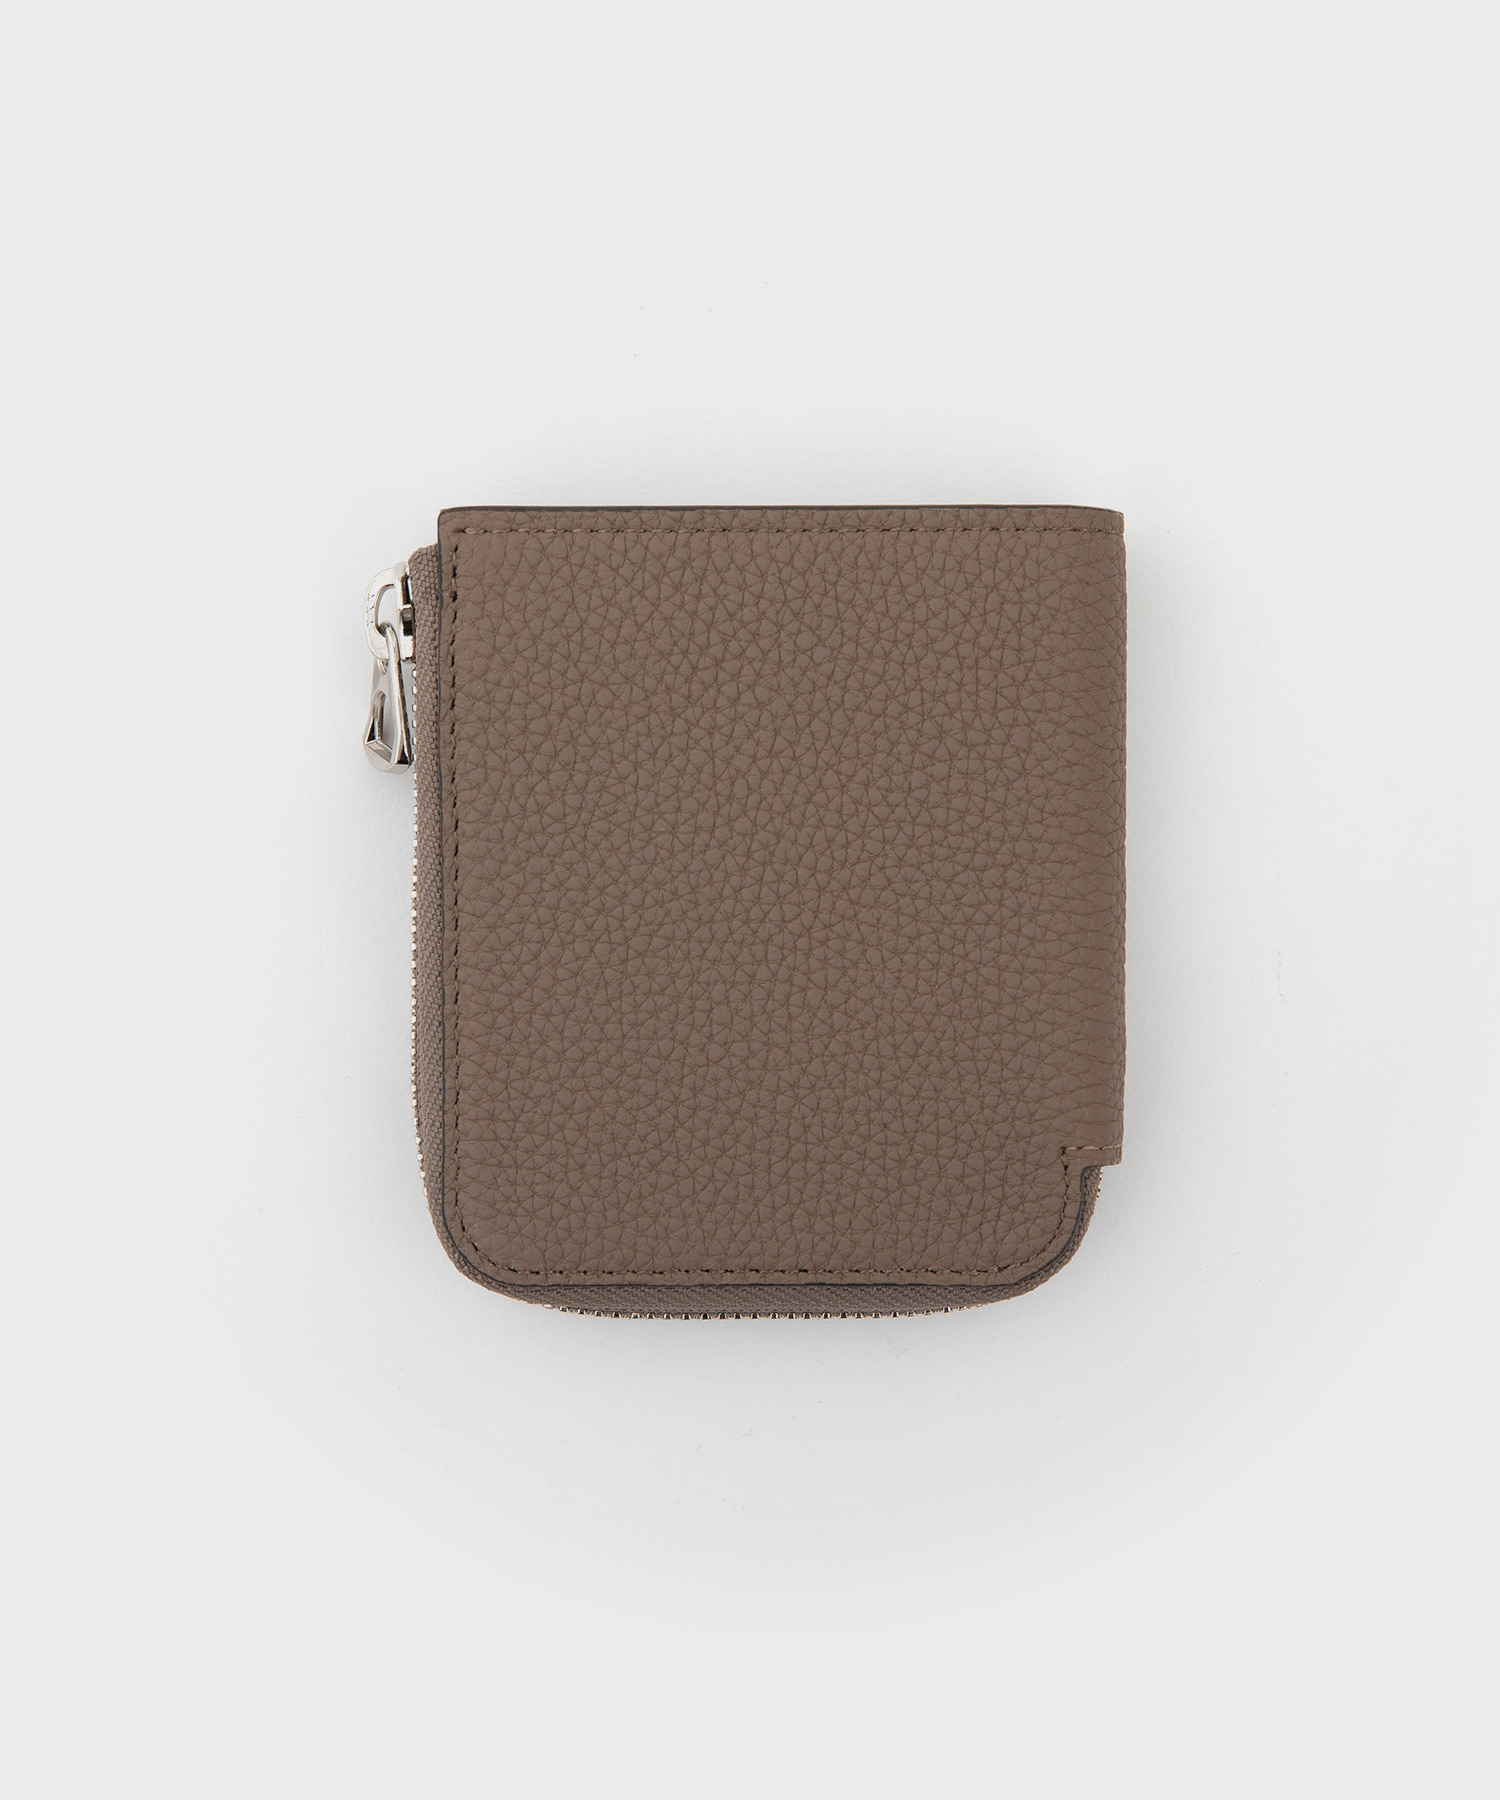 Cristy Very Compact Wallet .5 Diplo Fjord (Taupe)